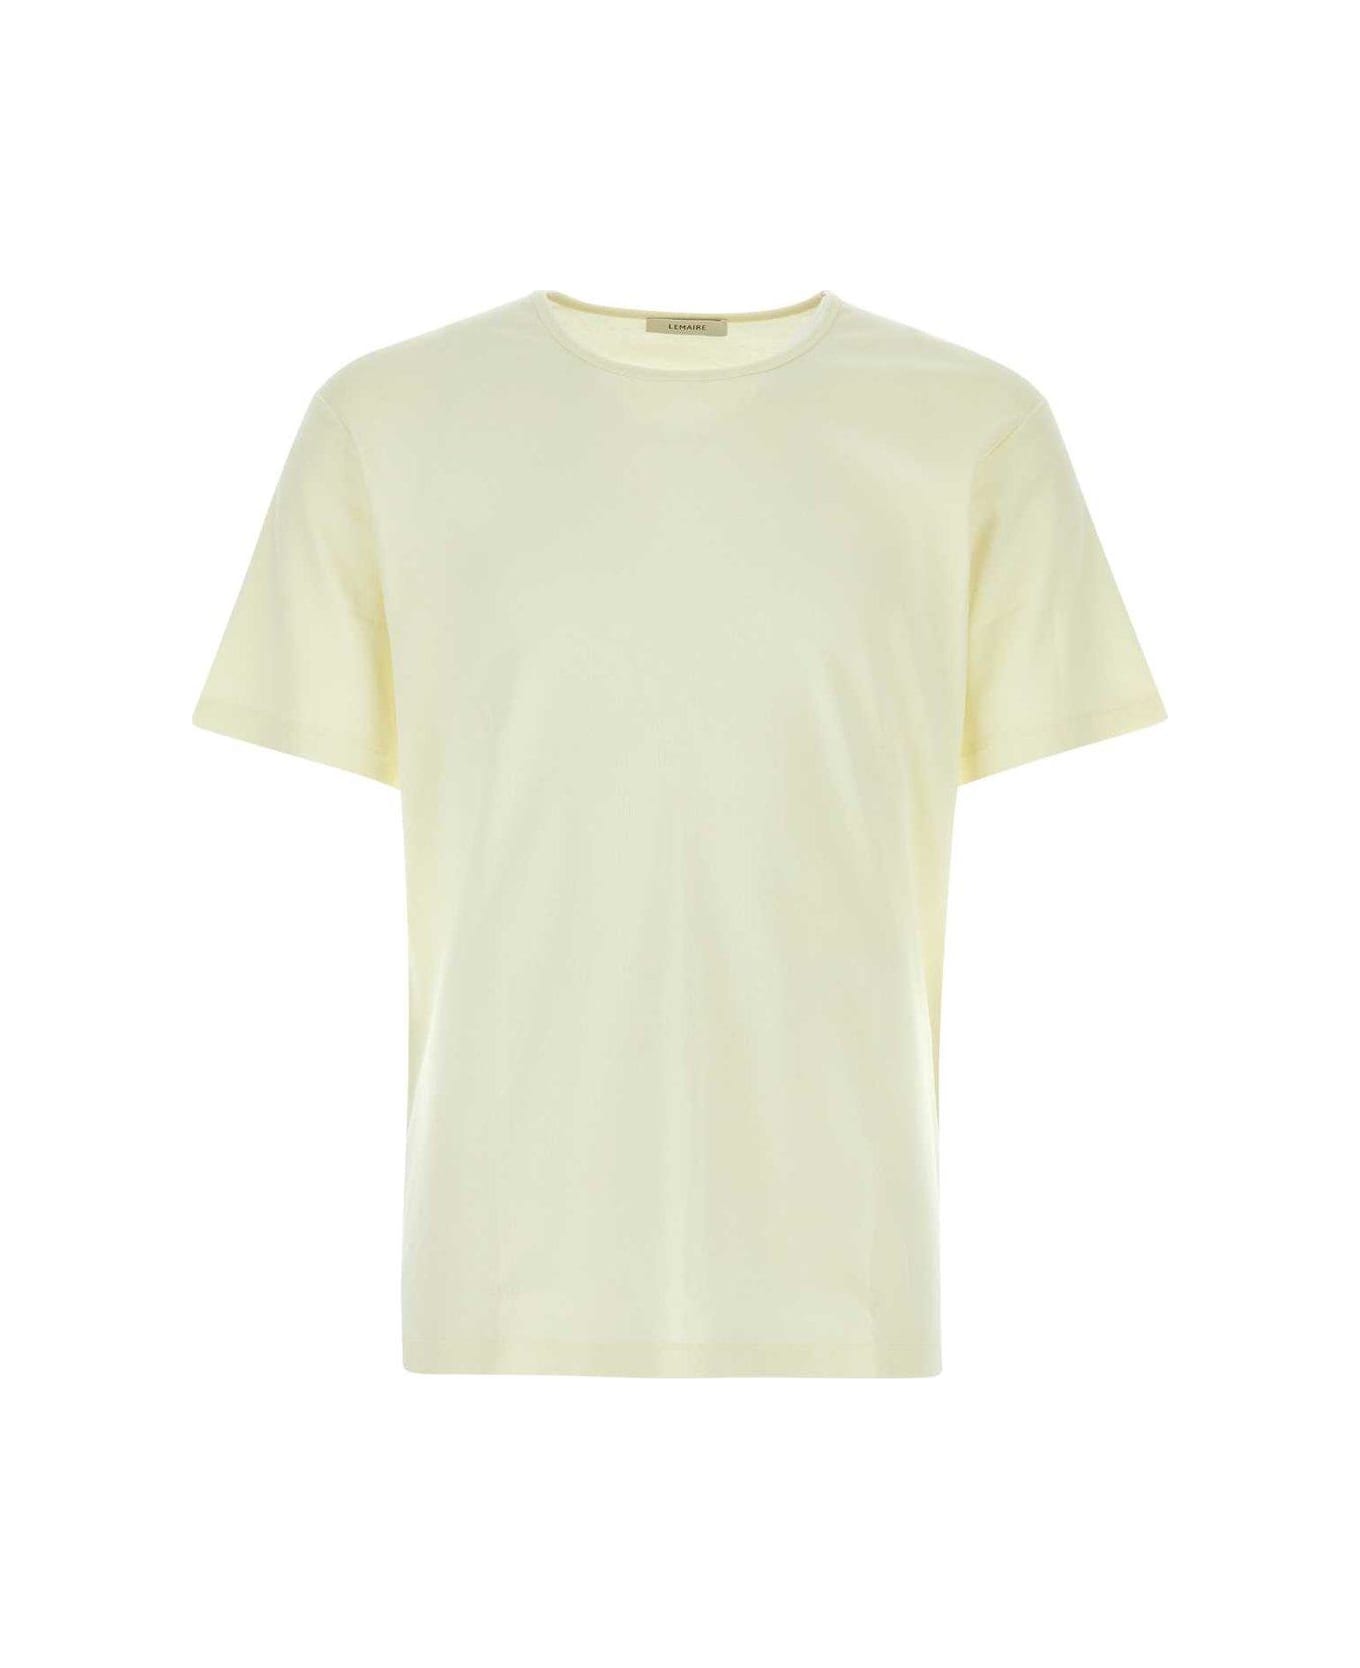 Lemaire Relaxed Fit Crewneck T-shirt - YELLOW シャツ